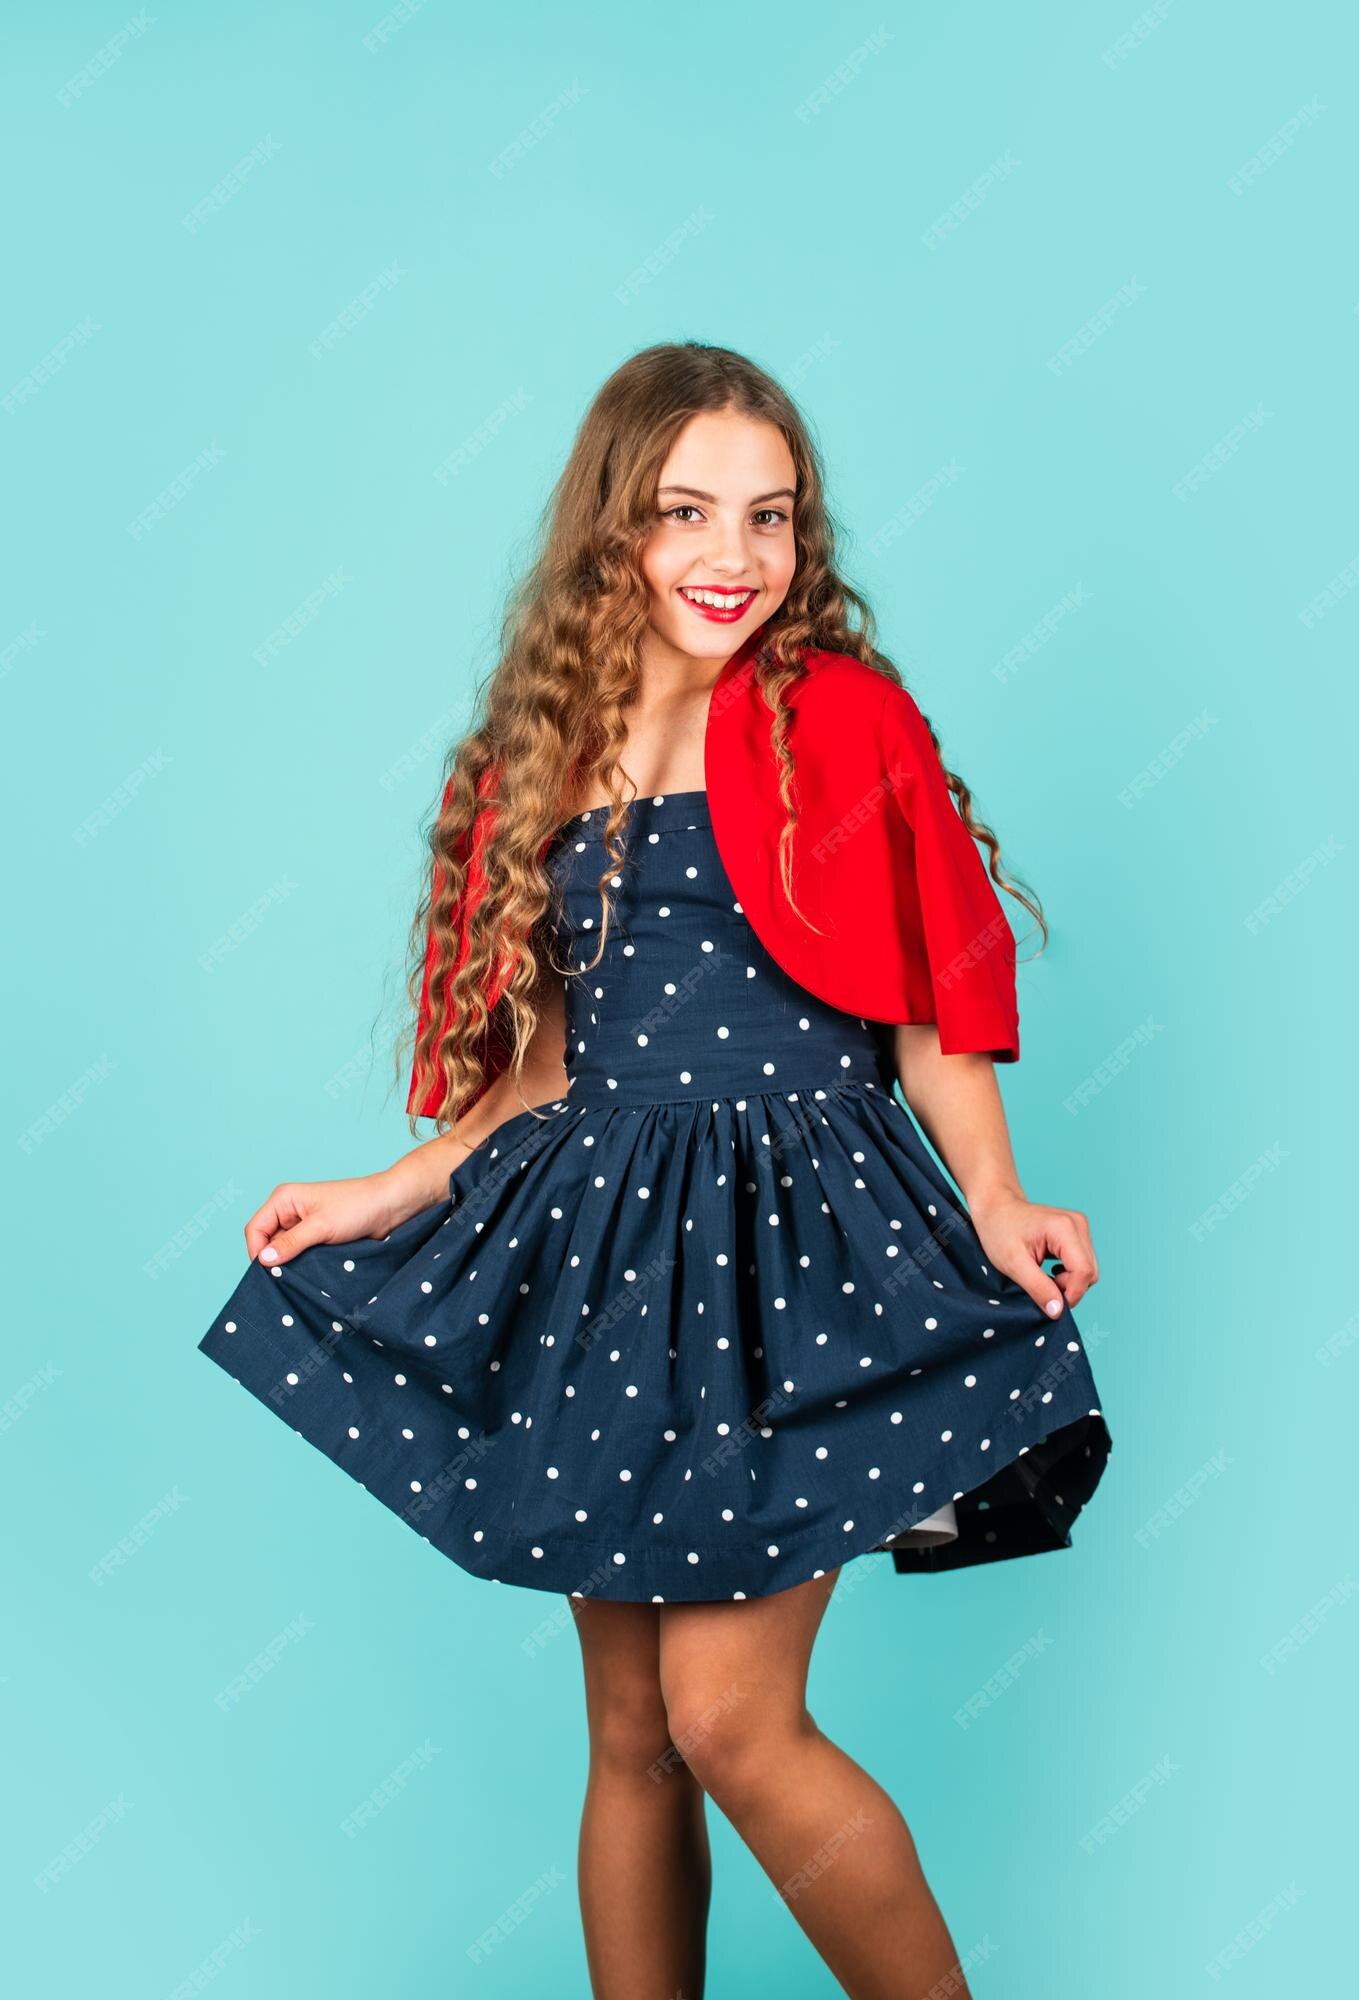 Premium Photo | Trendy haircuts vintage fashion for children pretty child  long curly hair small girl makeup beauty in dress lady in pinup style  glamour lifestyle small girl formal outfit elegant retro